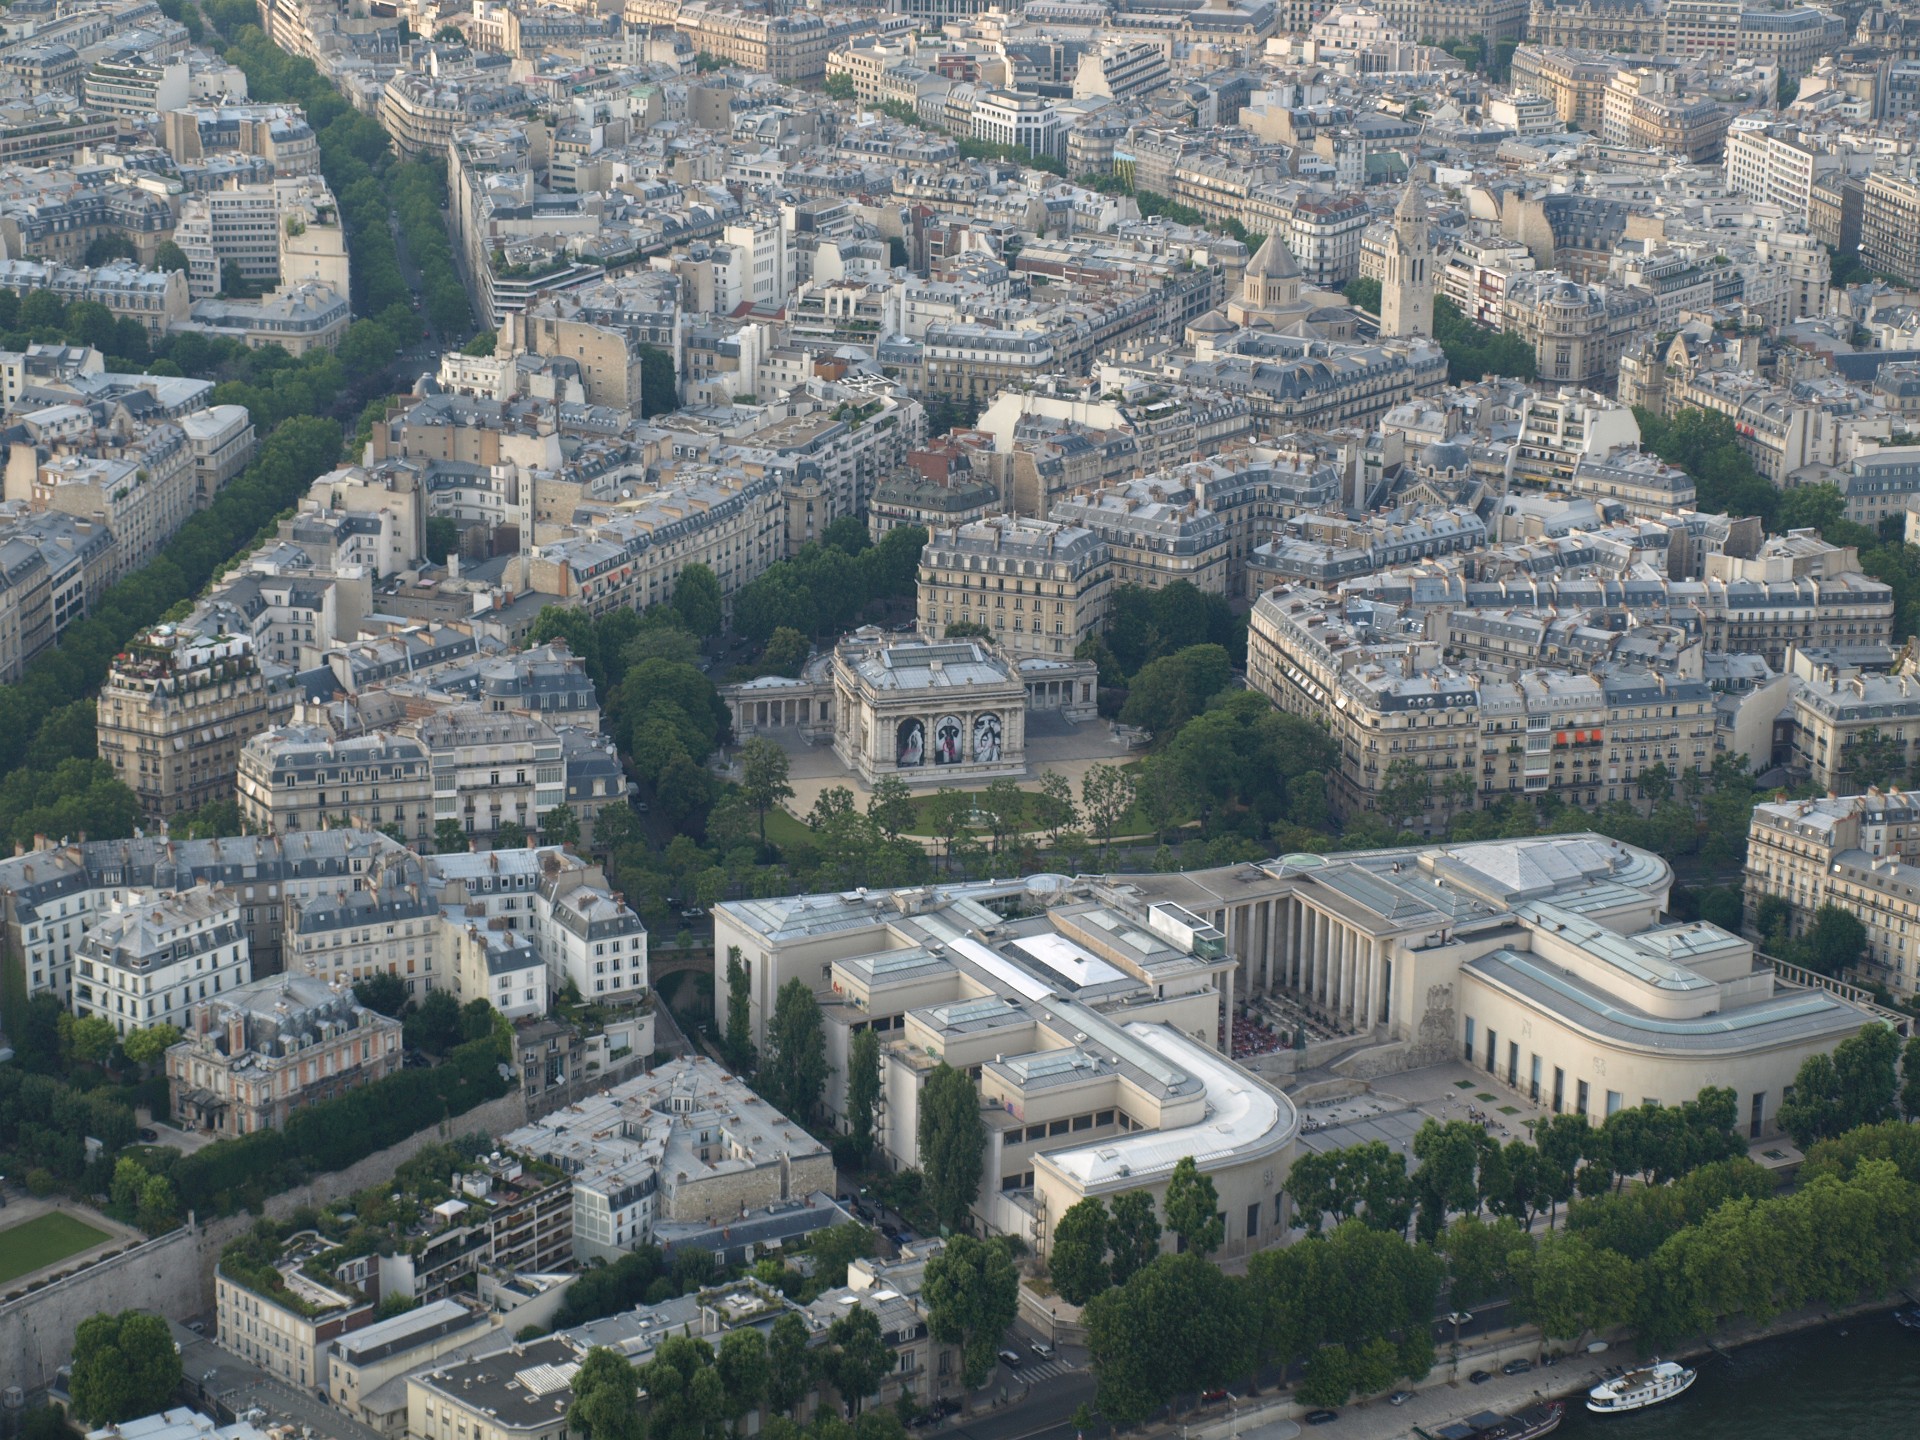 Paris Architecture From on High